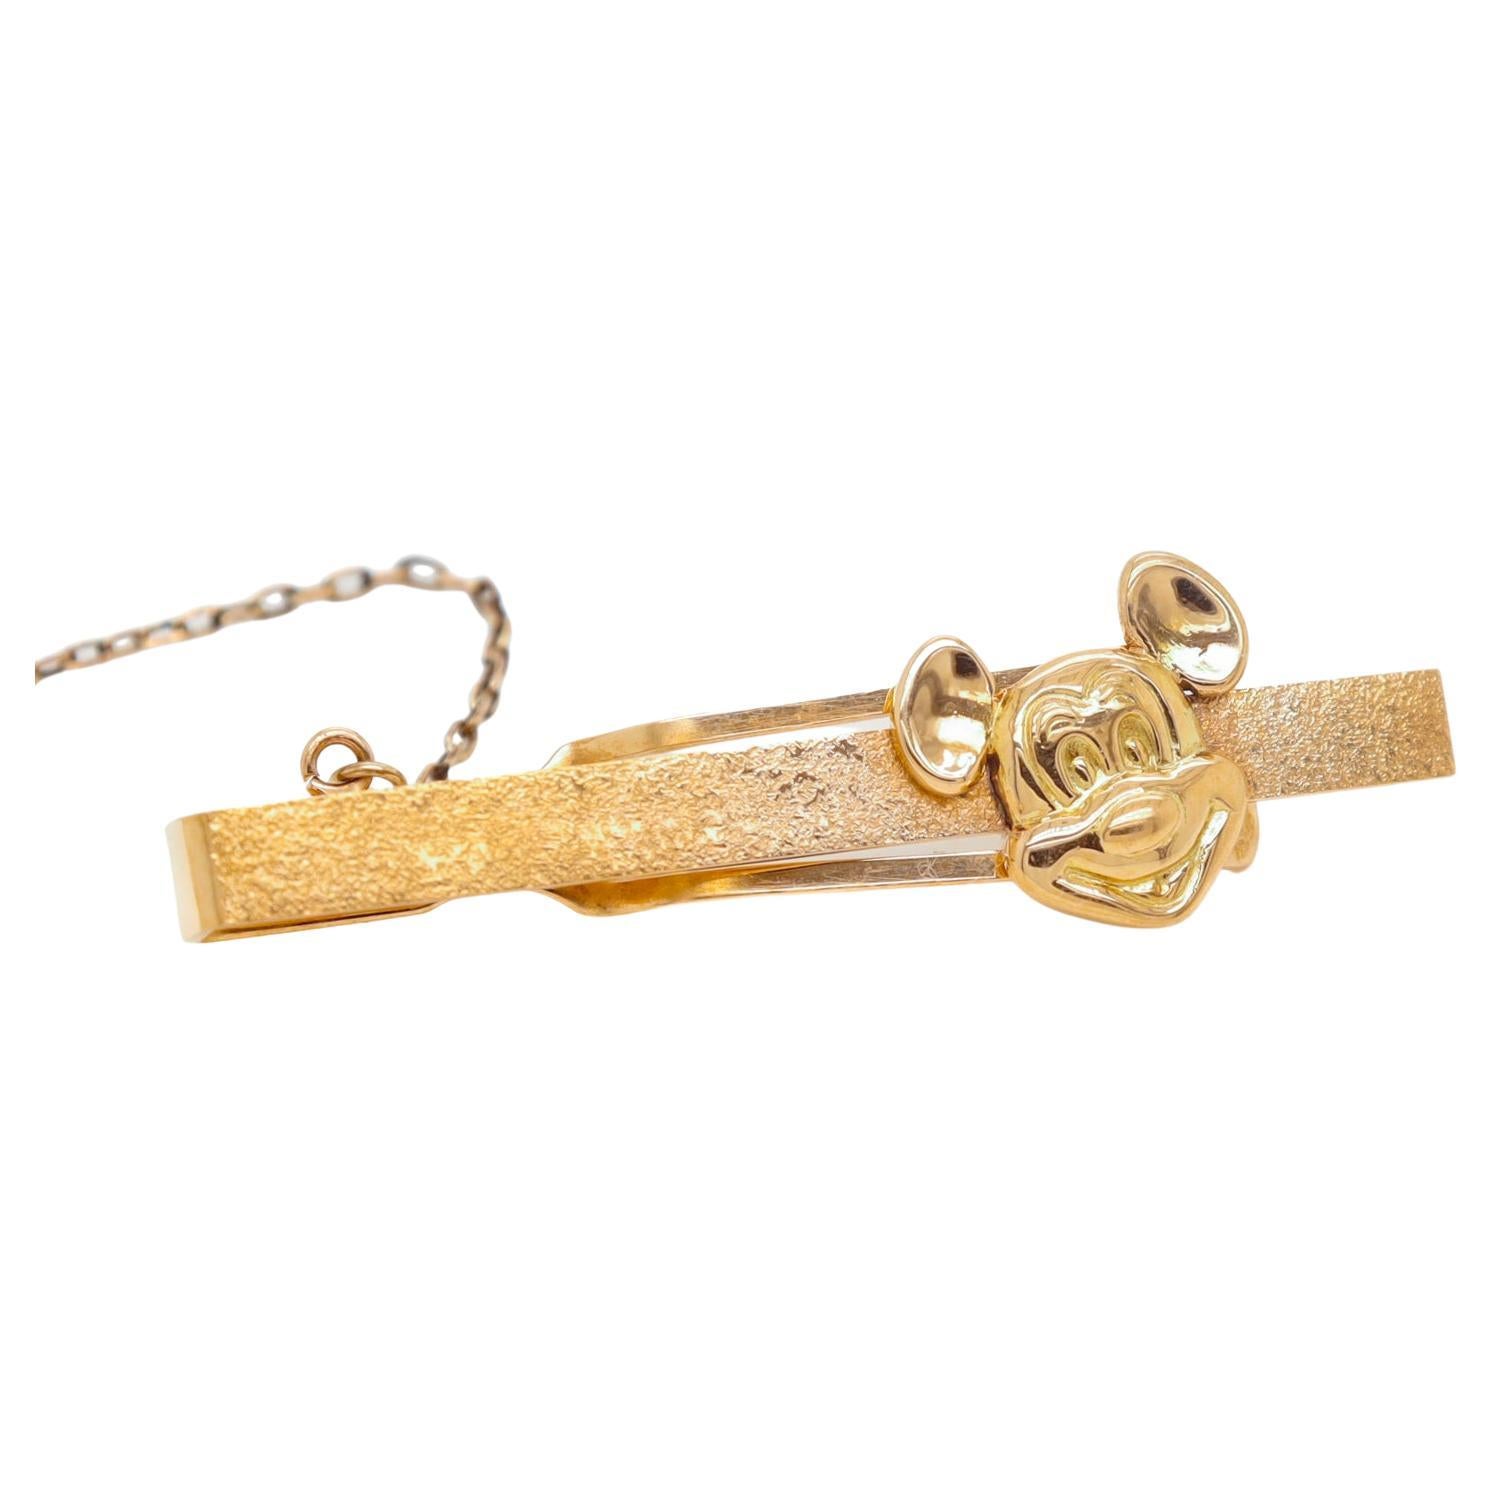 A fine vintage Mickey Mouse tie bar.

In 14k gold.

With a front with a stippled finish and mounted with a 3-dimensional head of Mickey Mouse.

Set with a button safety ring.

Marked to the reverse for Walt Disney Productions.

Simply a wonderful